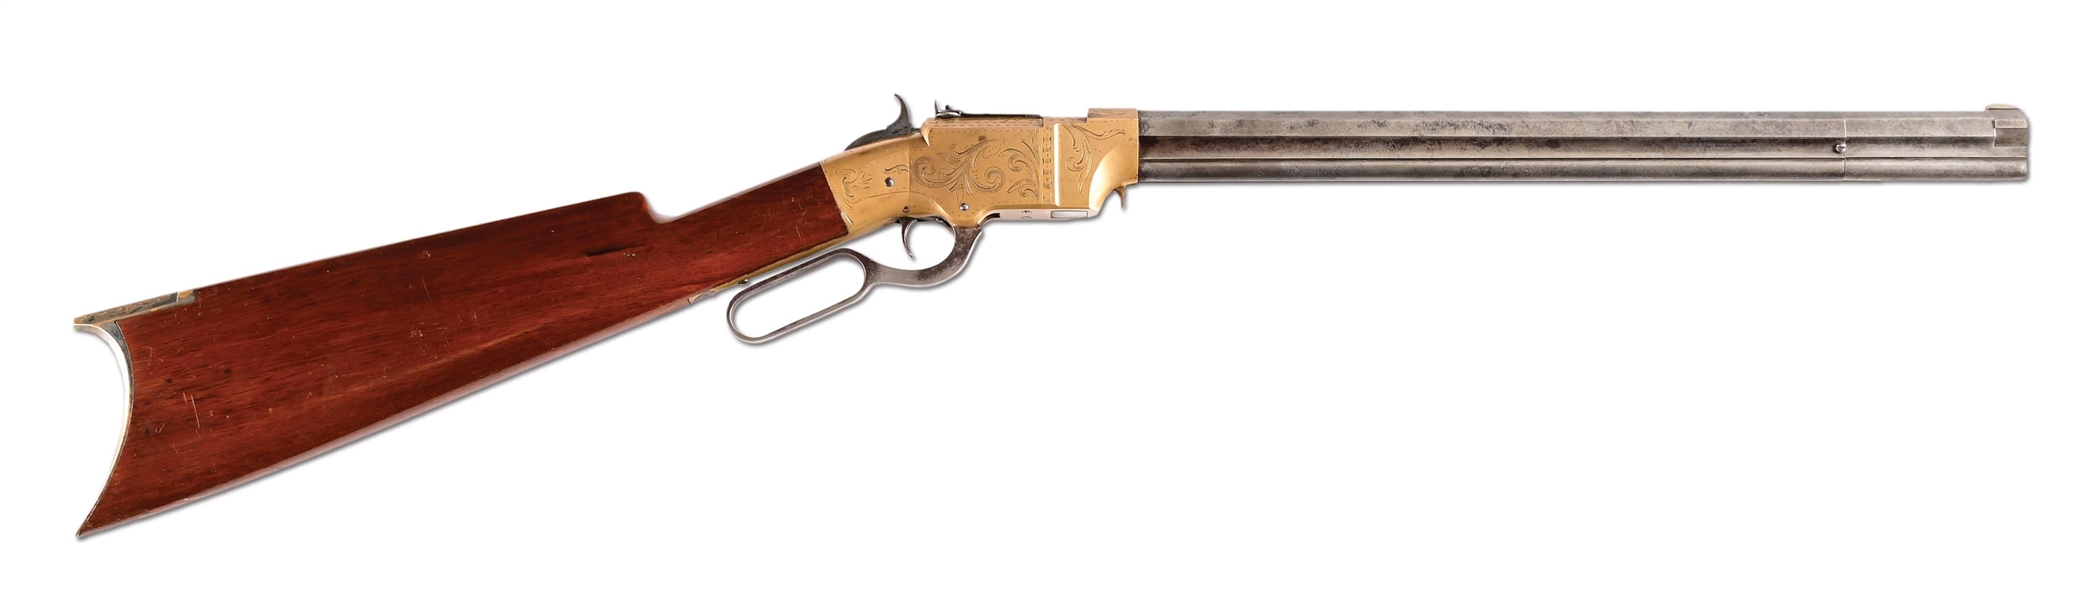 (A) EARLY ENGRAVED NEW HAVEN ARMS NO. 2 VOLCANIC CARBINE.